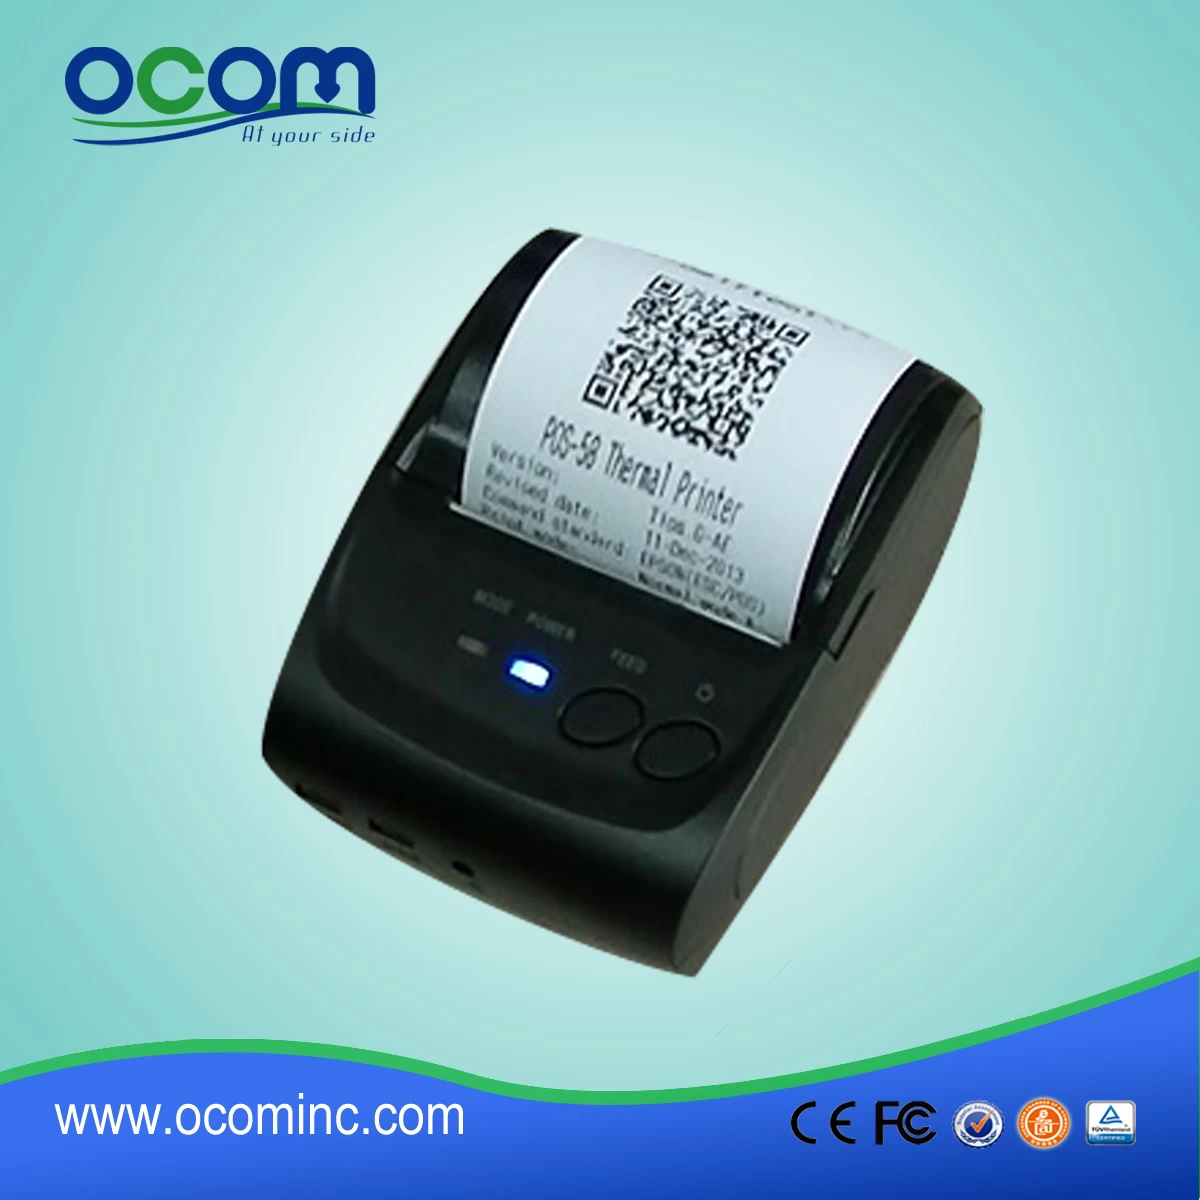 58mm Android Thermal printer with bluetooth--OCPP-M05